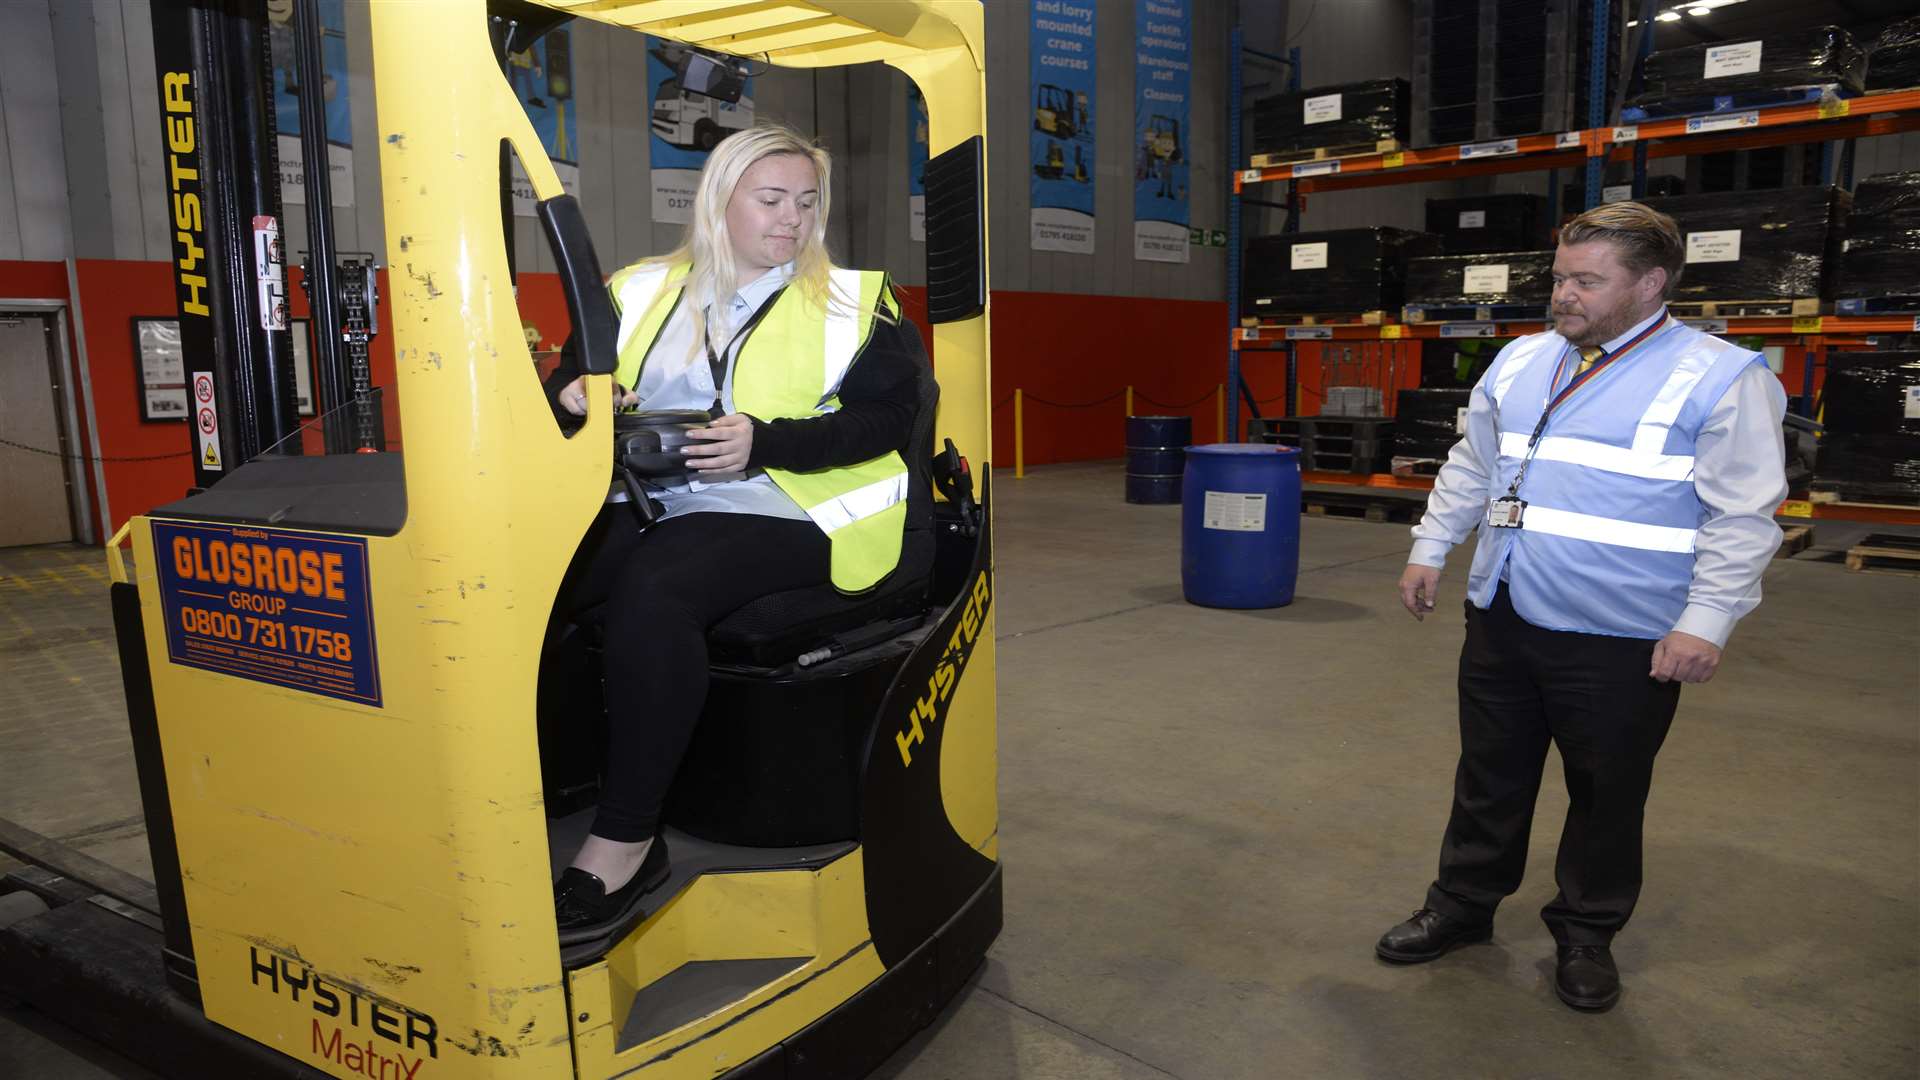 Georgia Eve takes a change from her usual role as an administrator at Mainstream to try out fork lift truck driving with instructor Charles Osmond during the open day